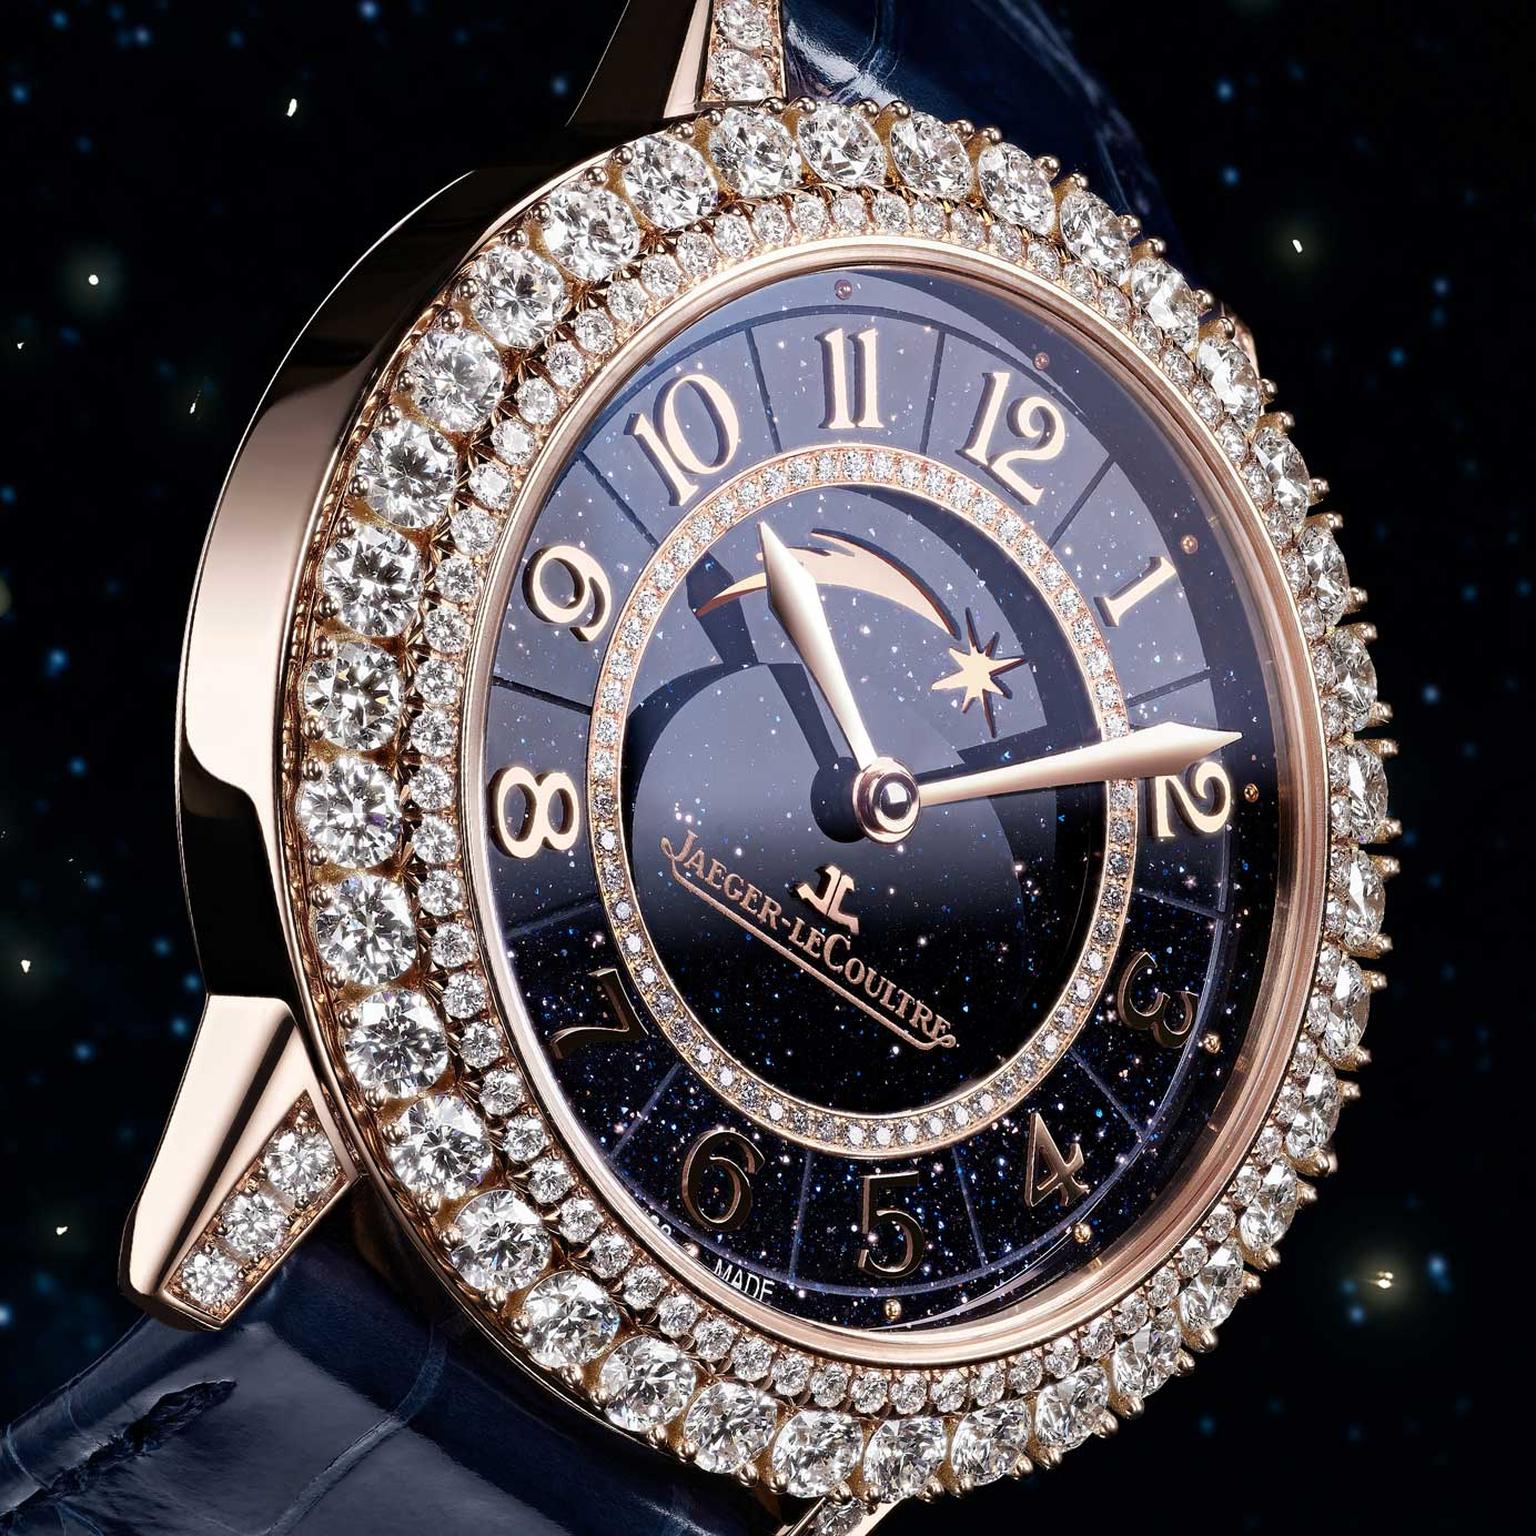 Jaeger-LeCoultre Rendez-Vous Dazzling Star gold and diamond ladies watch